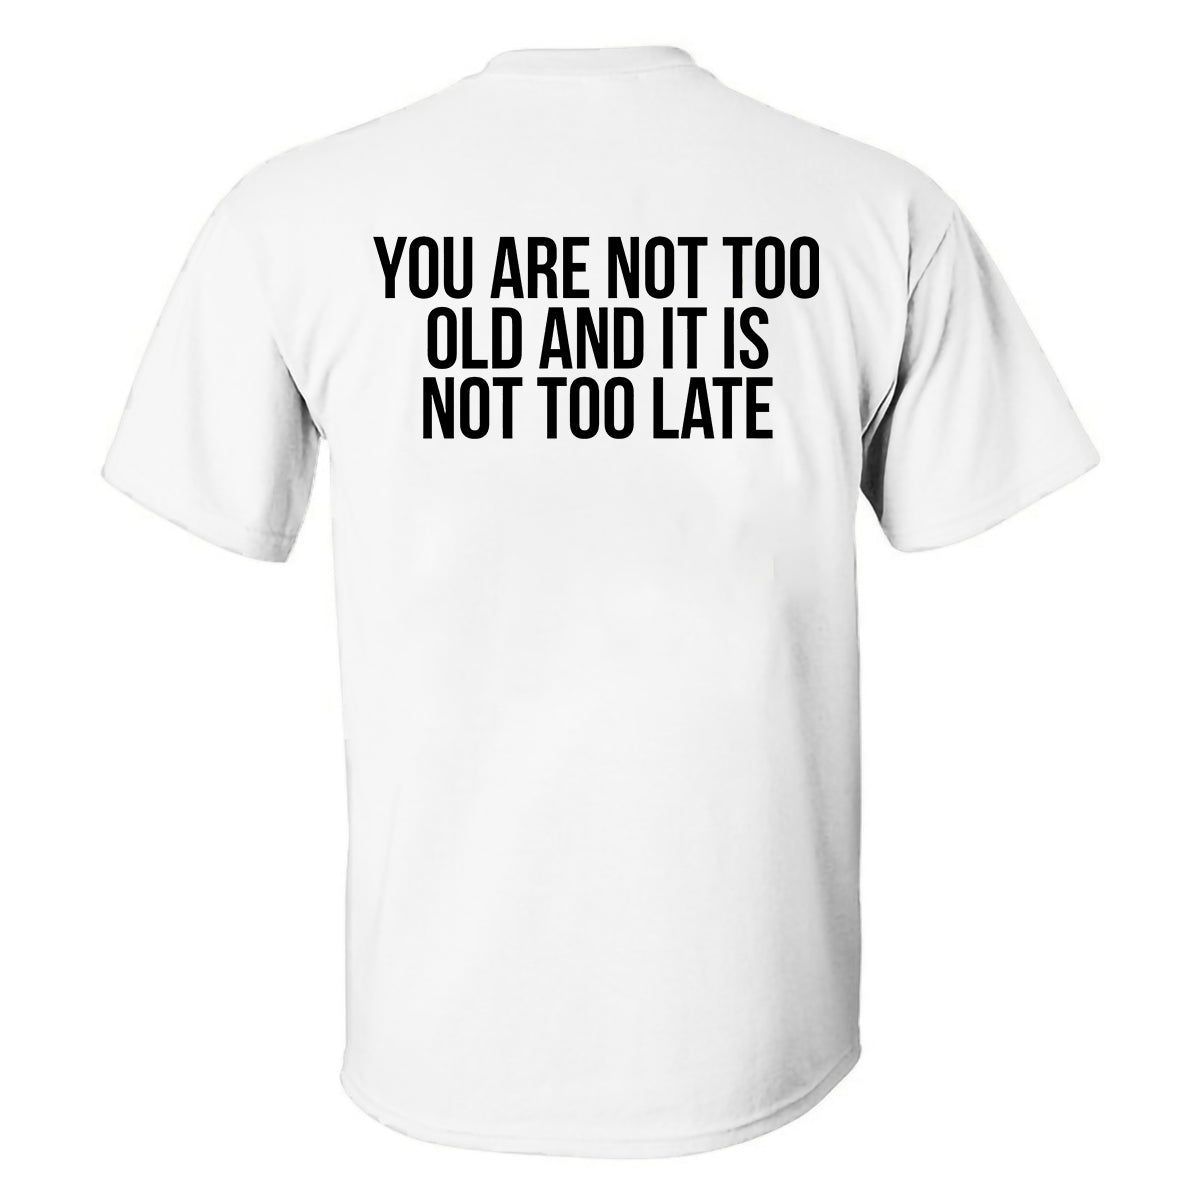 You Are Not Too Old And It Is Not Too Late Printed Men's T-shirt